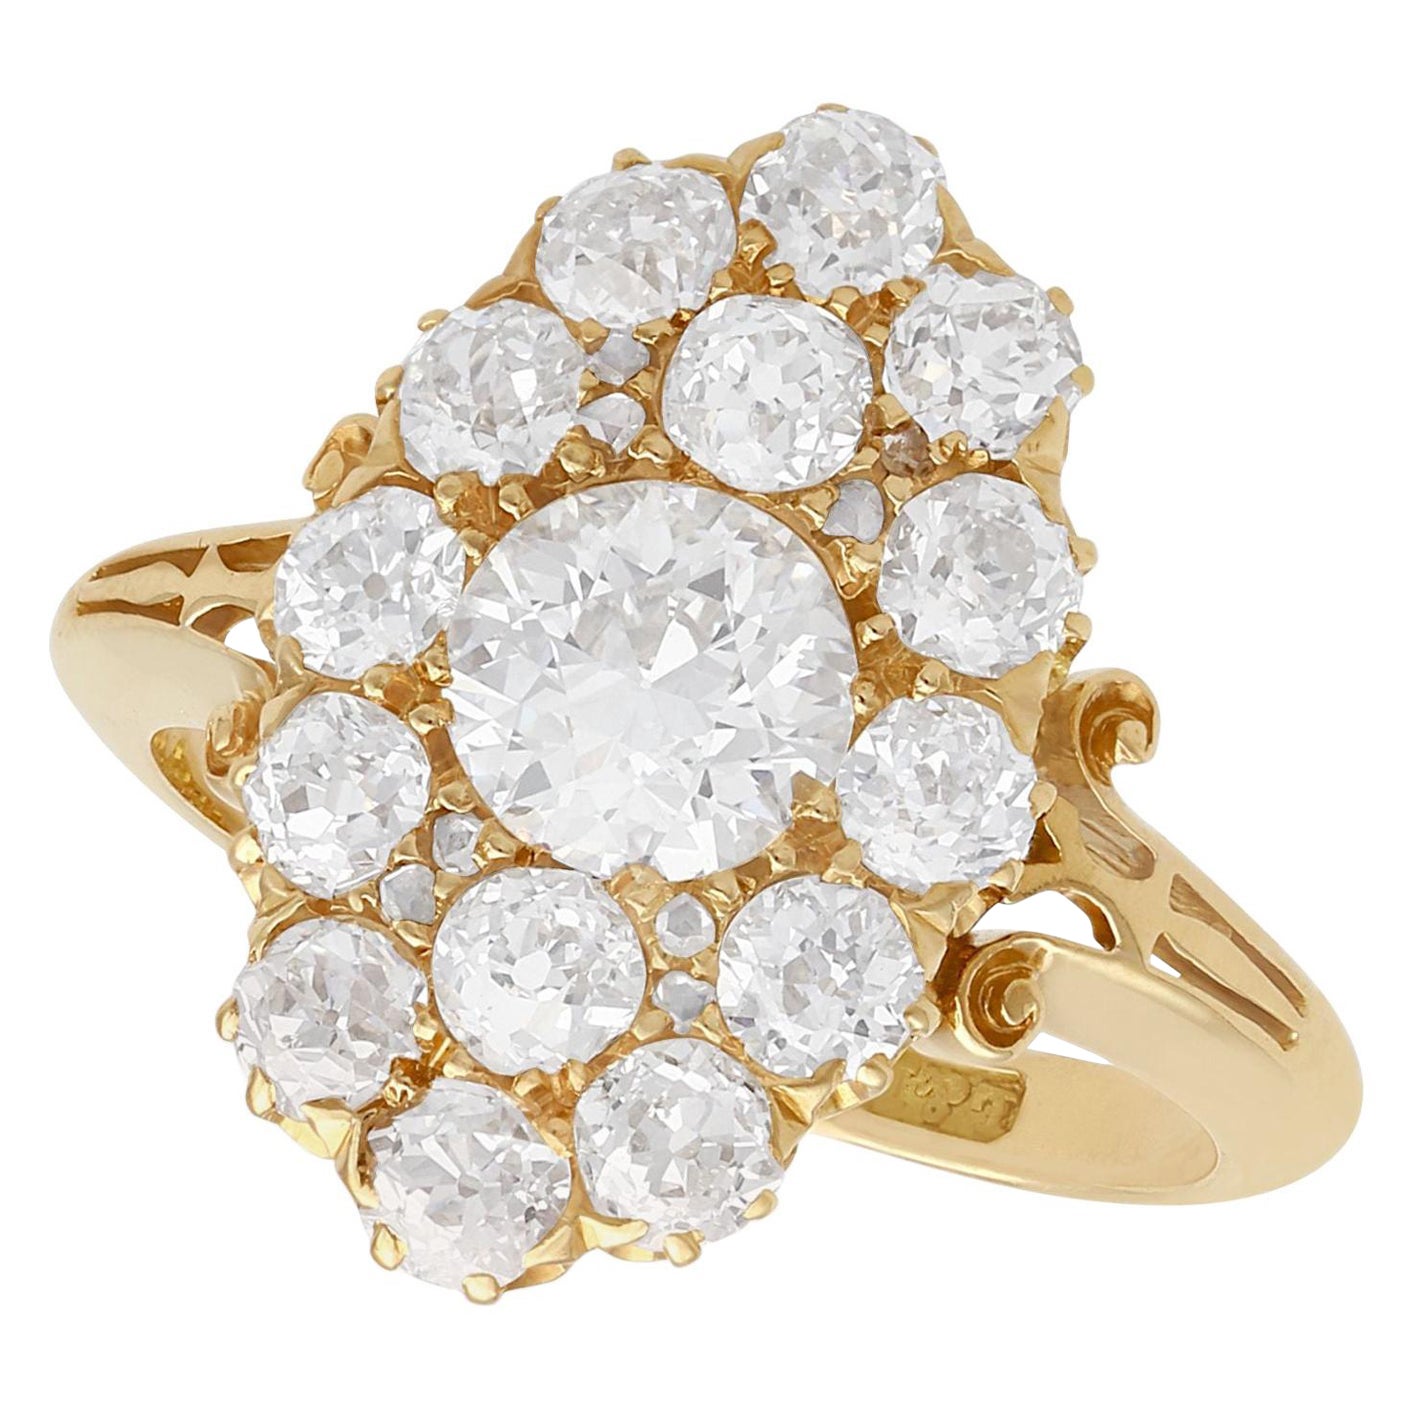 Antique Victorian 2.35 Carat Diamond and Yellow Gold Cocktail Ring